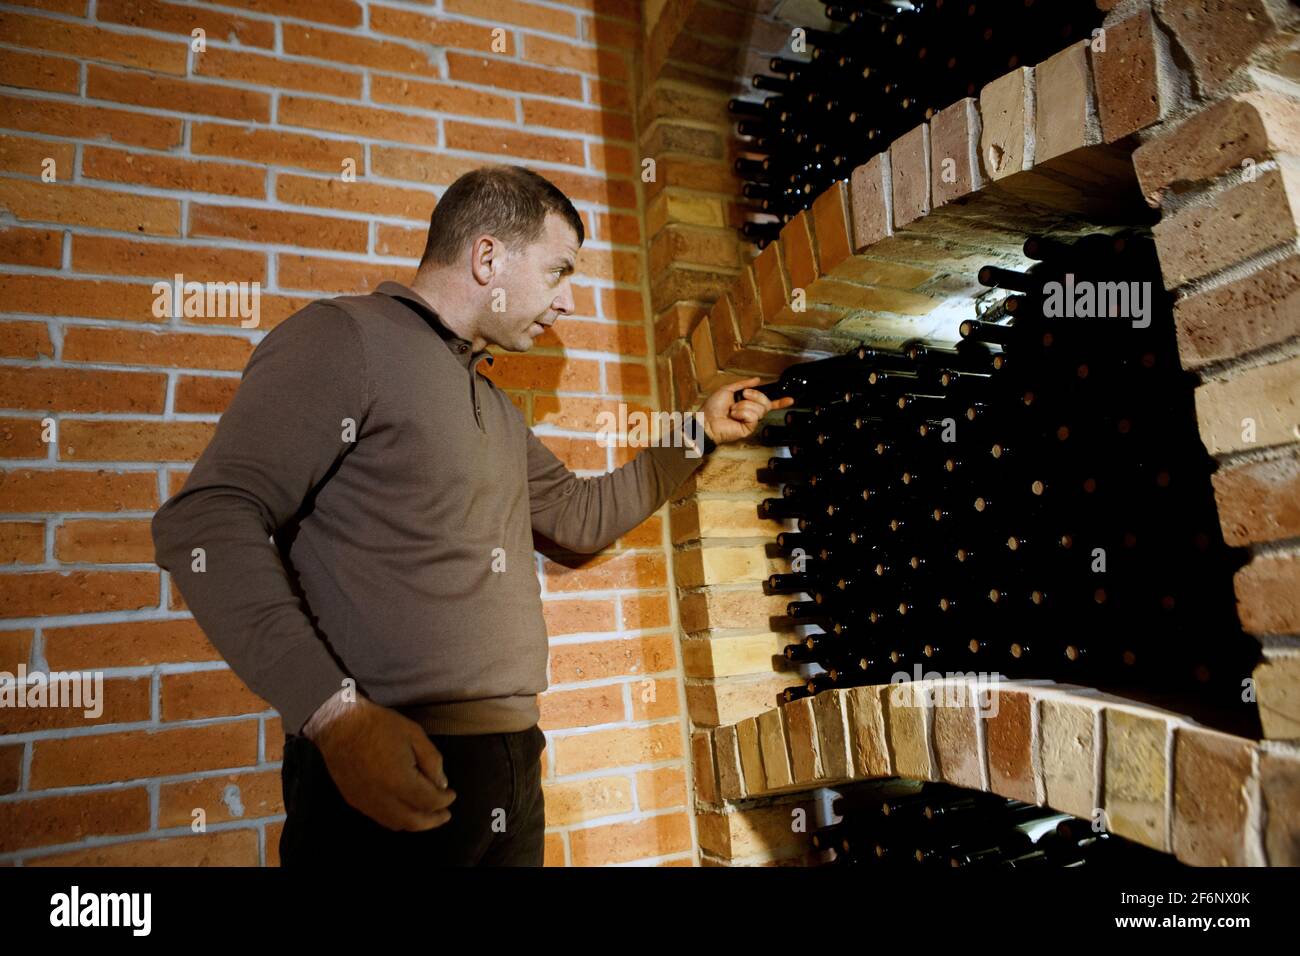 BEREHOVE, UKRAINE - MARCH 25, 2021 - Chief winemaker Zoltan Udvargeli picks up a bottle of wine in a new wine cellar at Chateau Chizay set up for agei Stock Photo